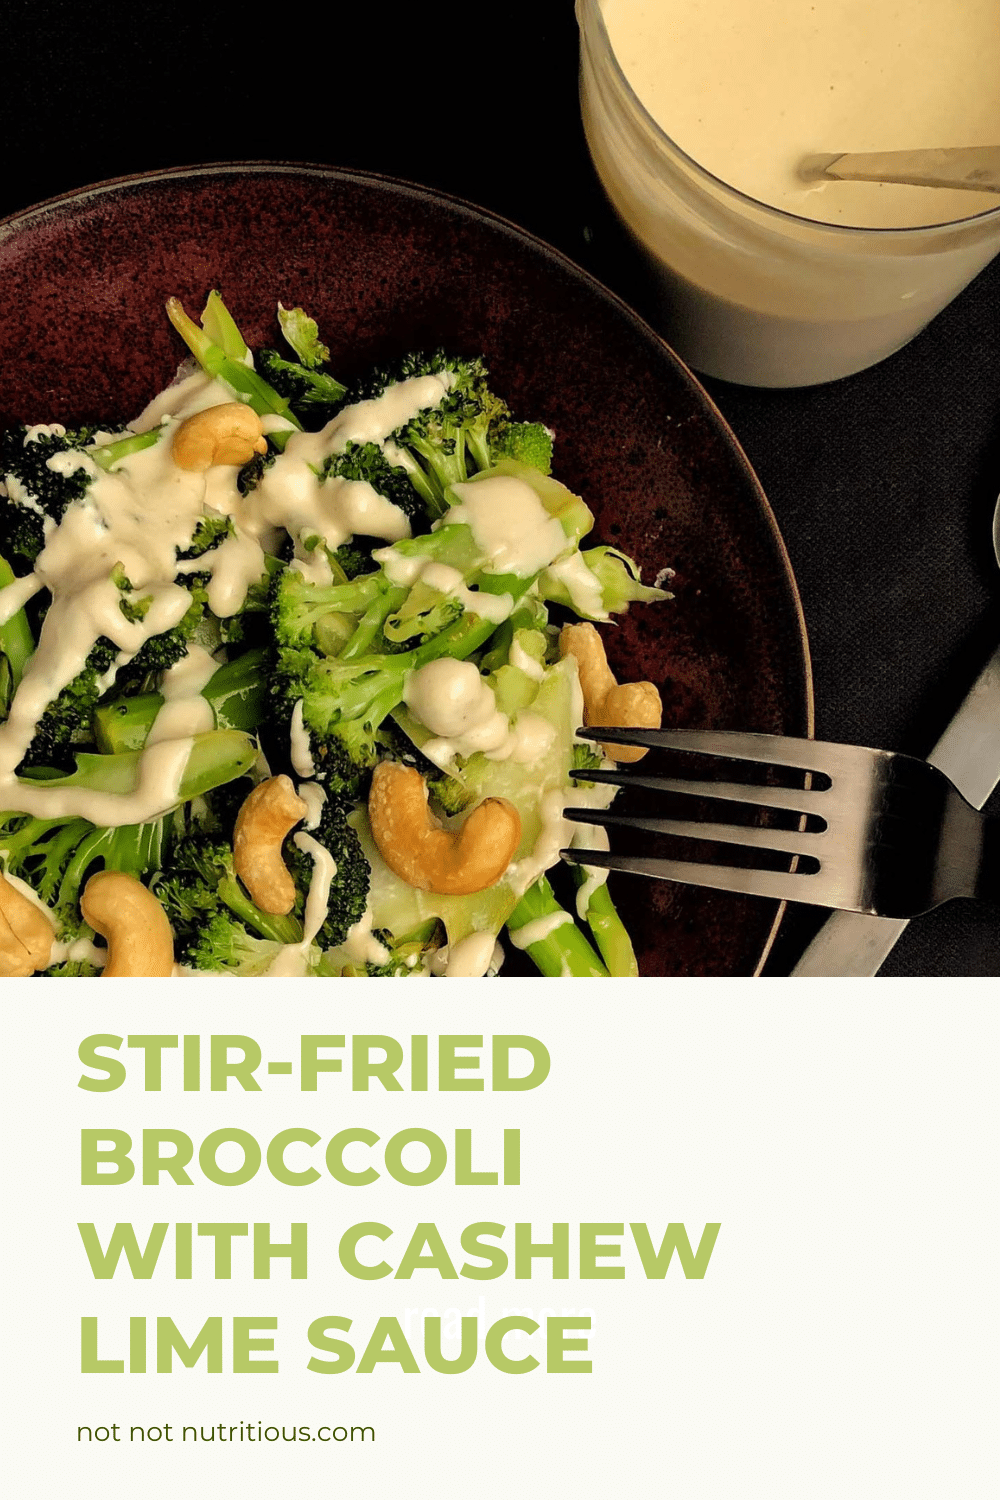 Pin for Stir-fried Broccoli with Cashew Lime Sauce